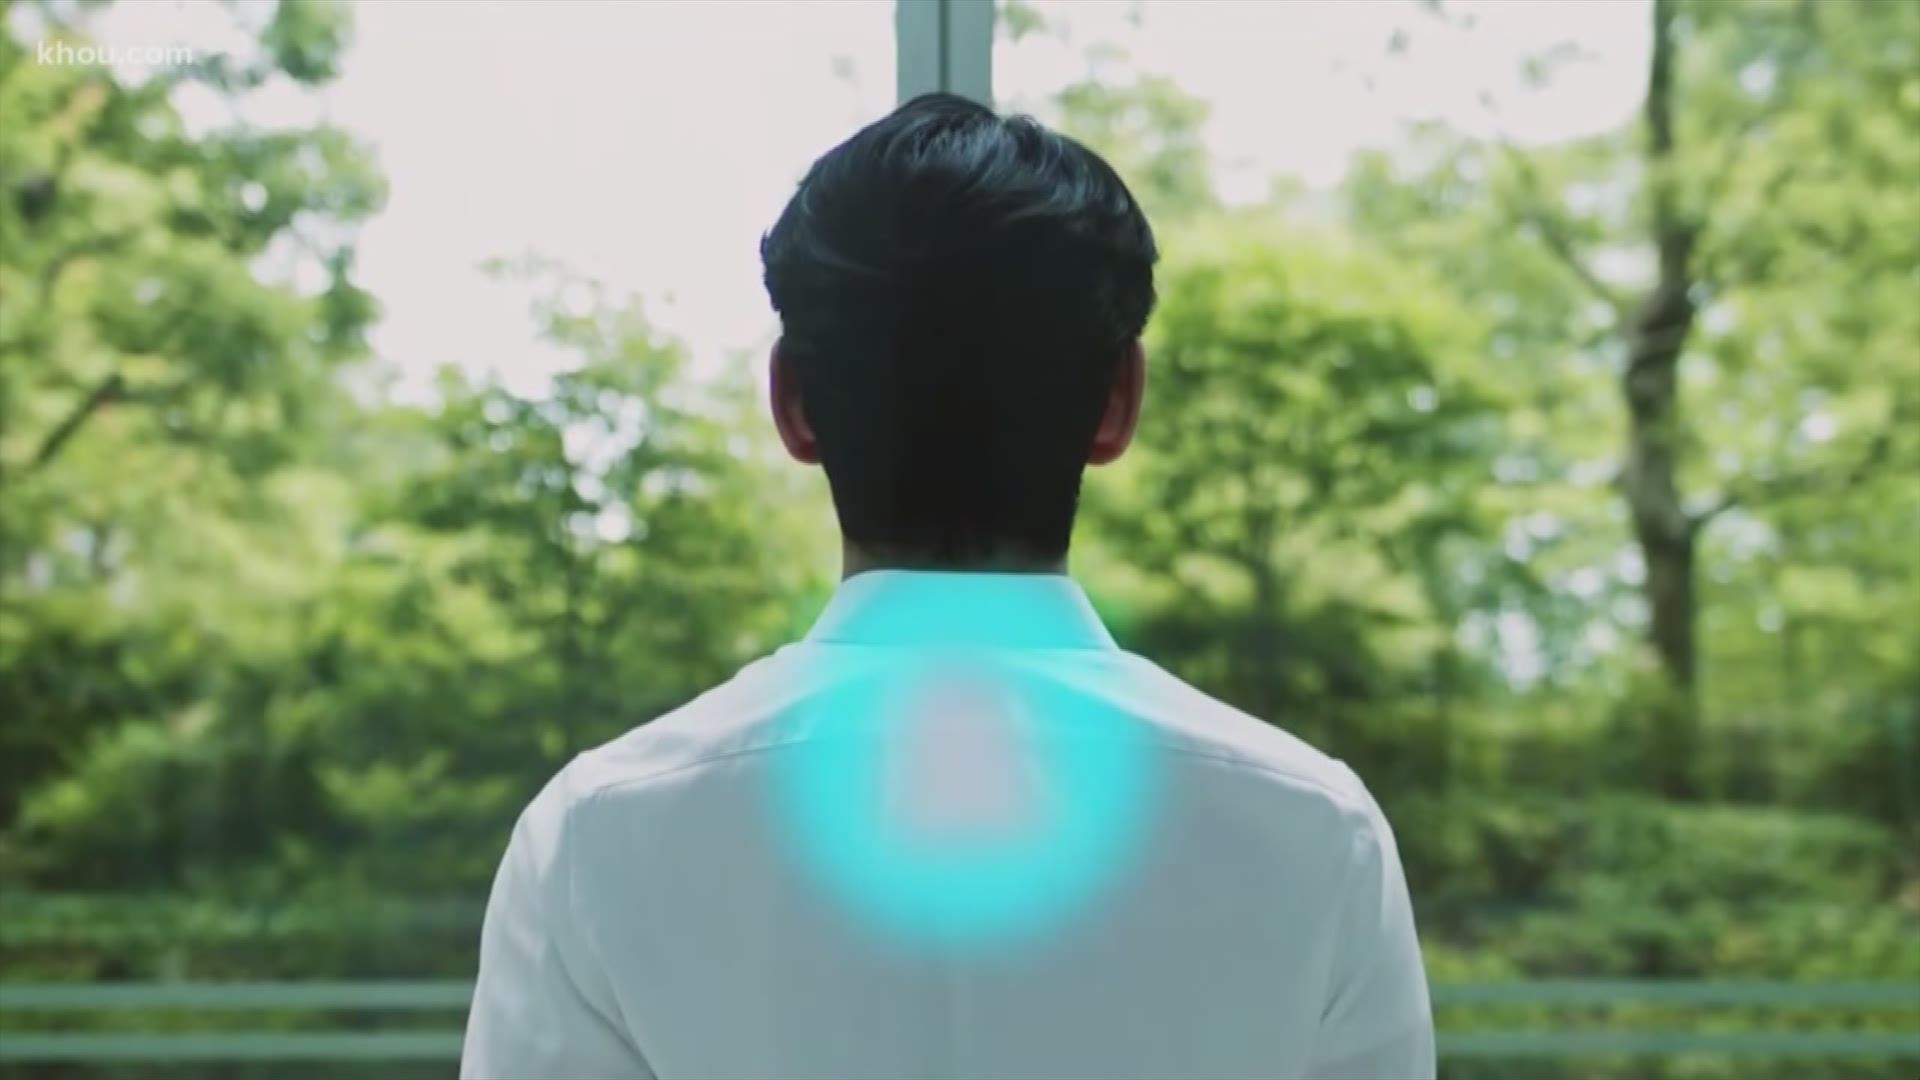 Sony is developing a wearable air conditioner that slips on the back of your shirt and is controlled by an app on your phone.